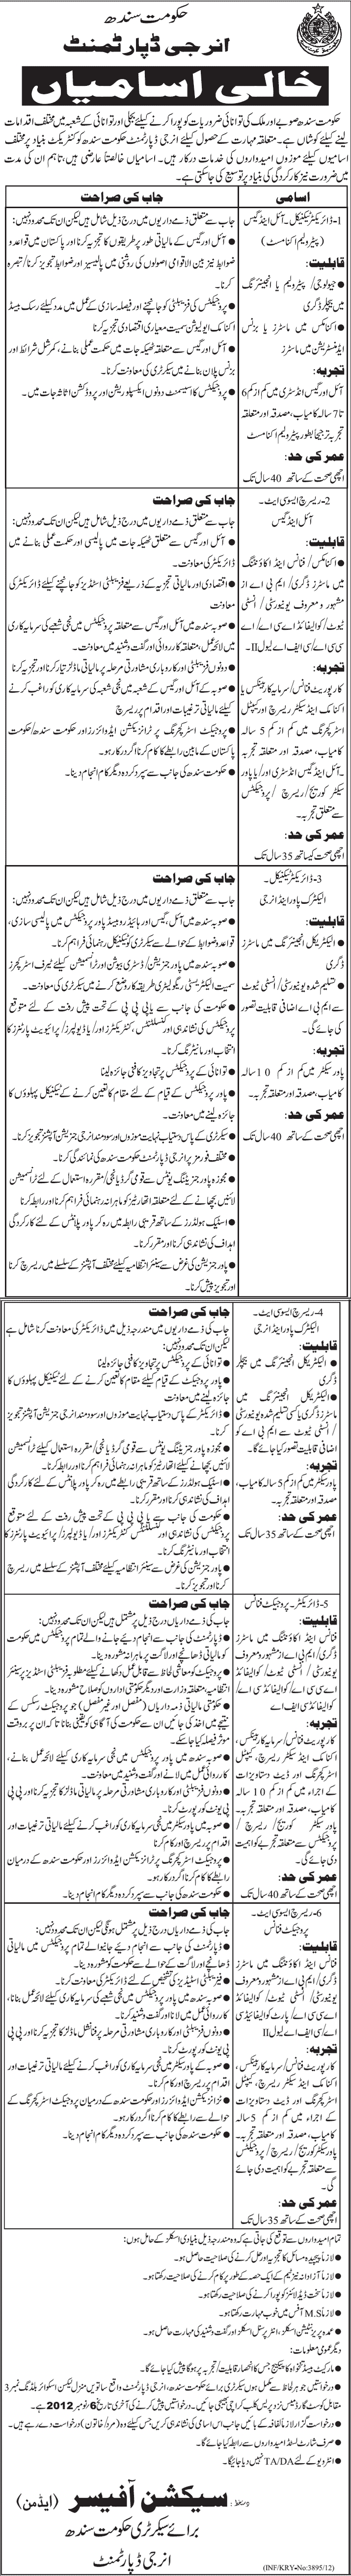 Government of Sindh Energy Department Jobs